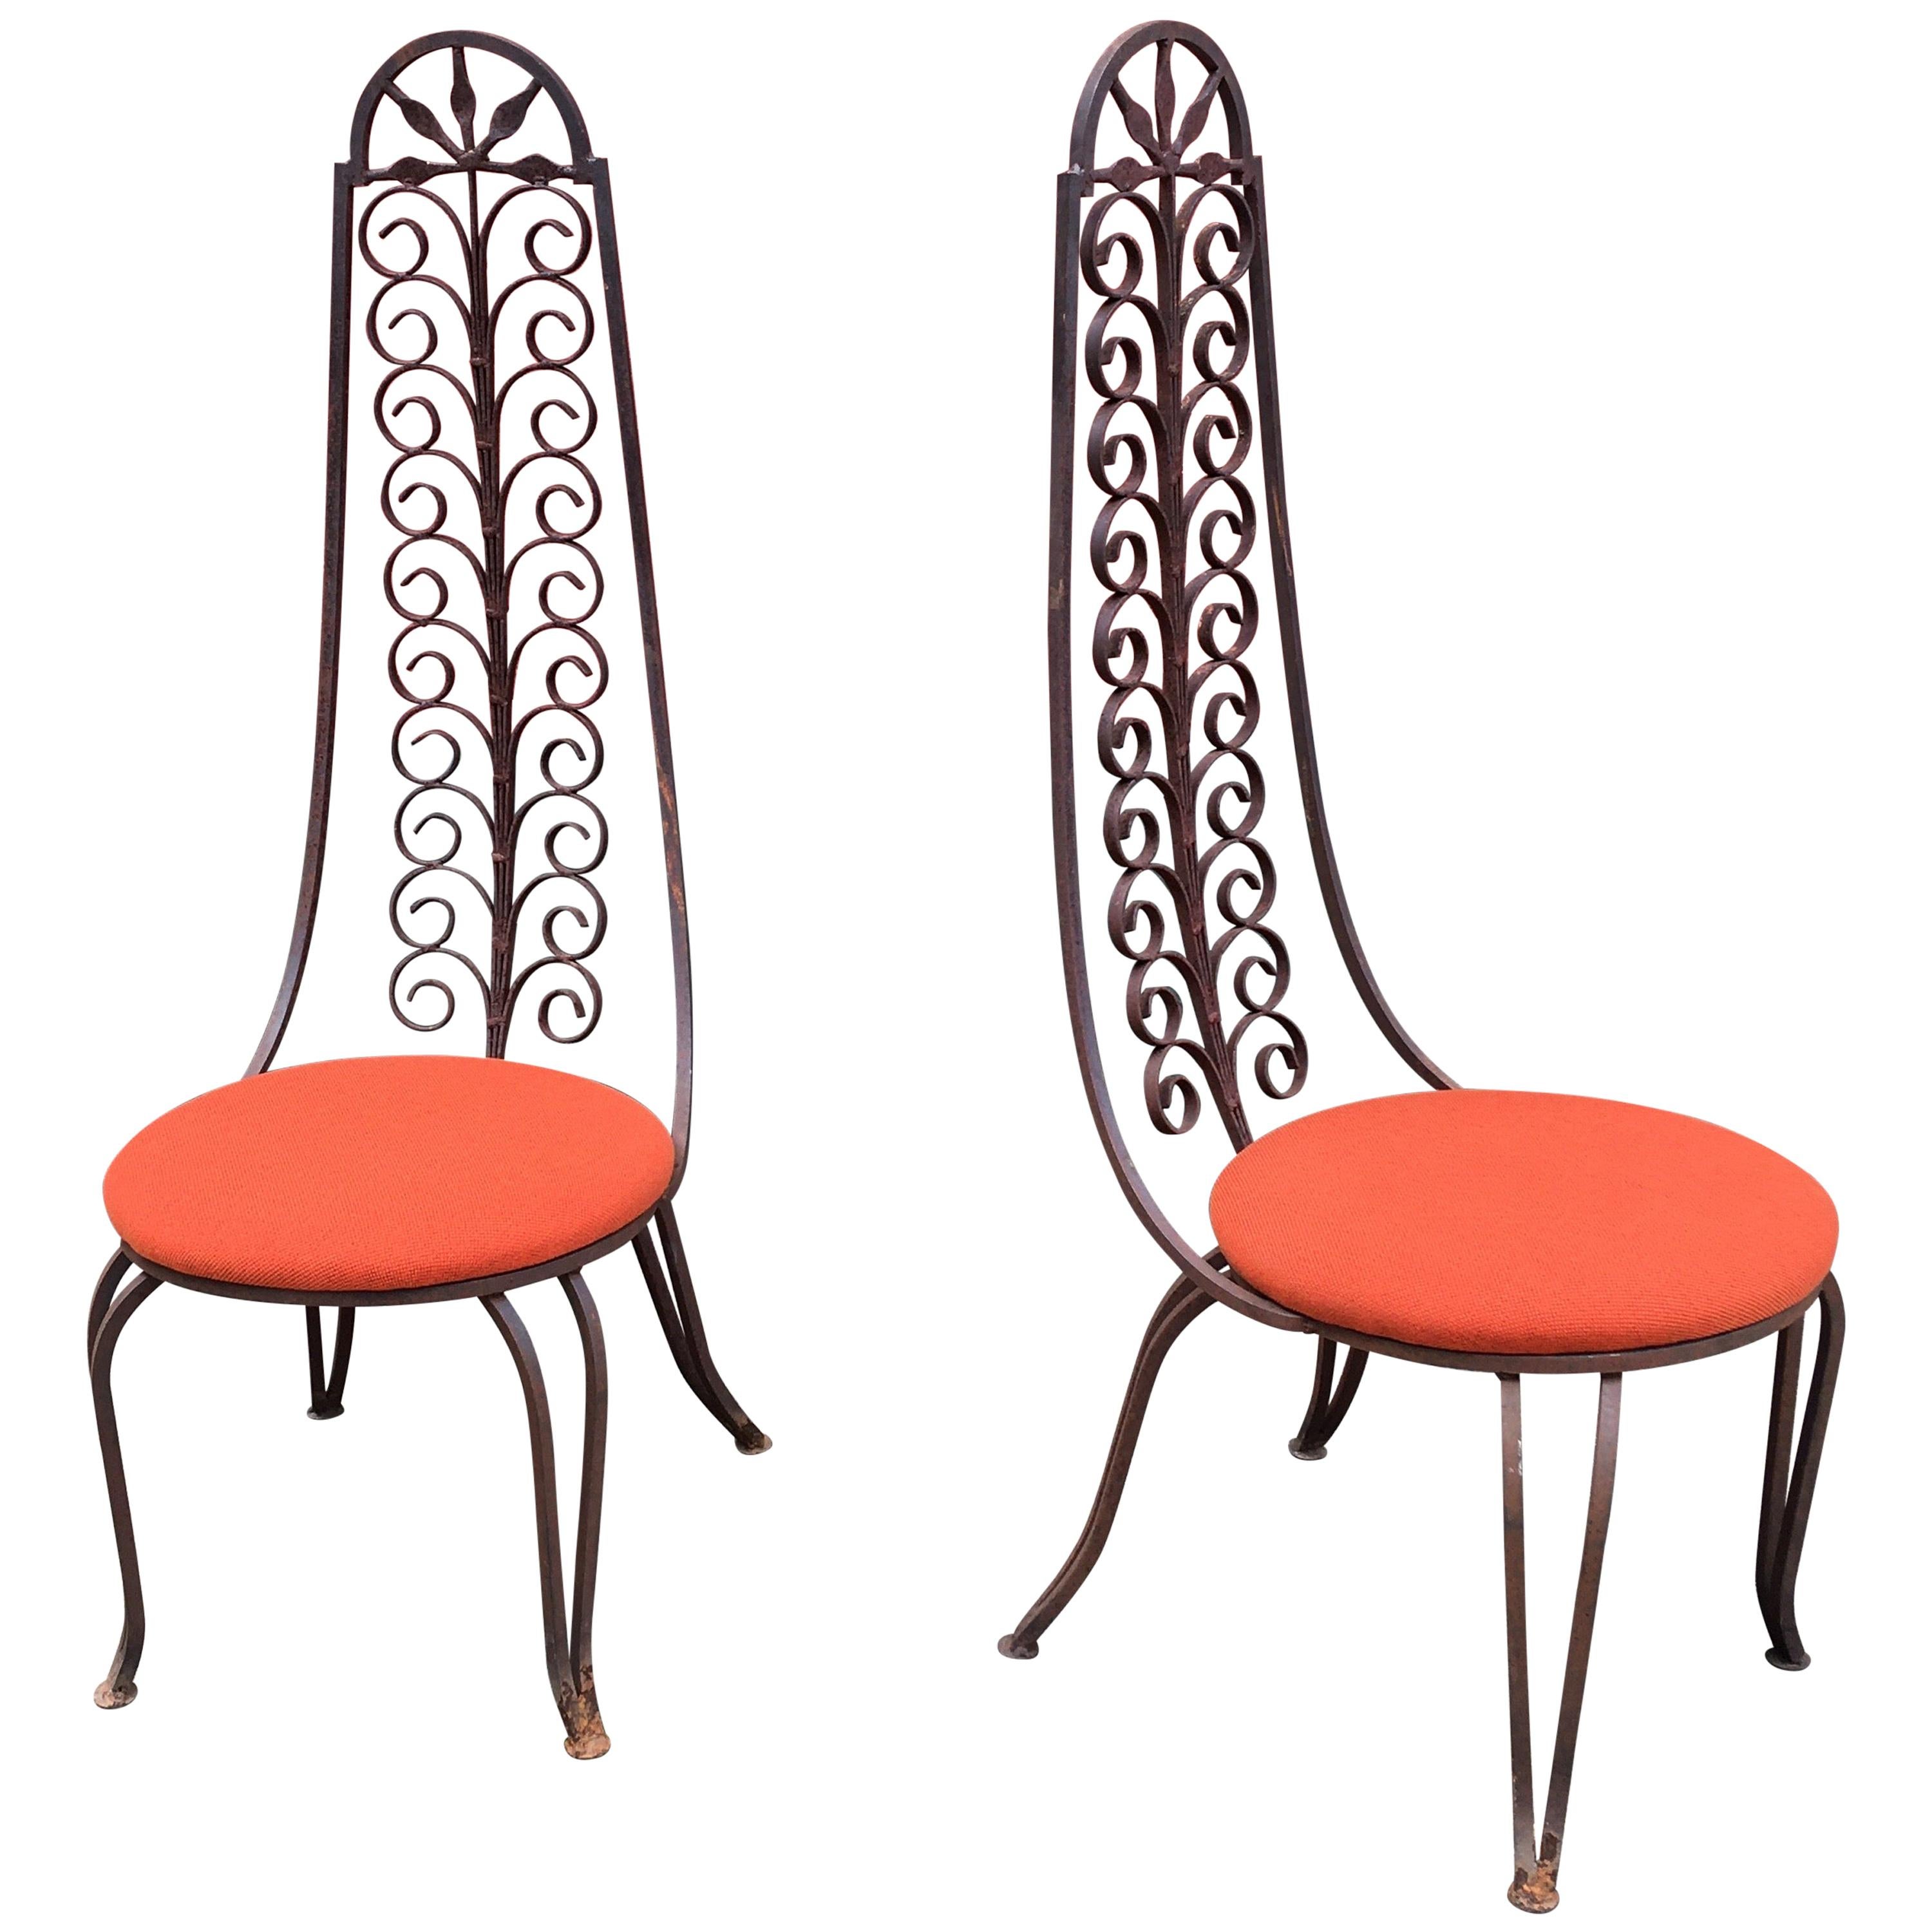 Pair of Iron High Back Chairs in the Style of Salterini